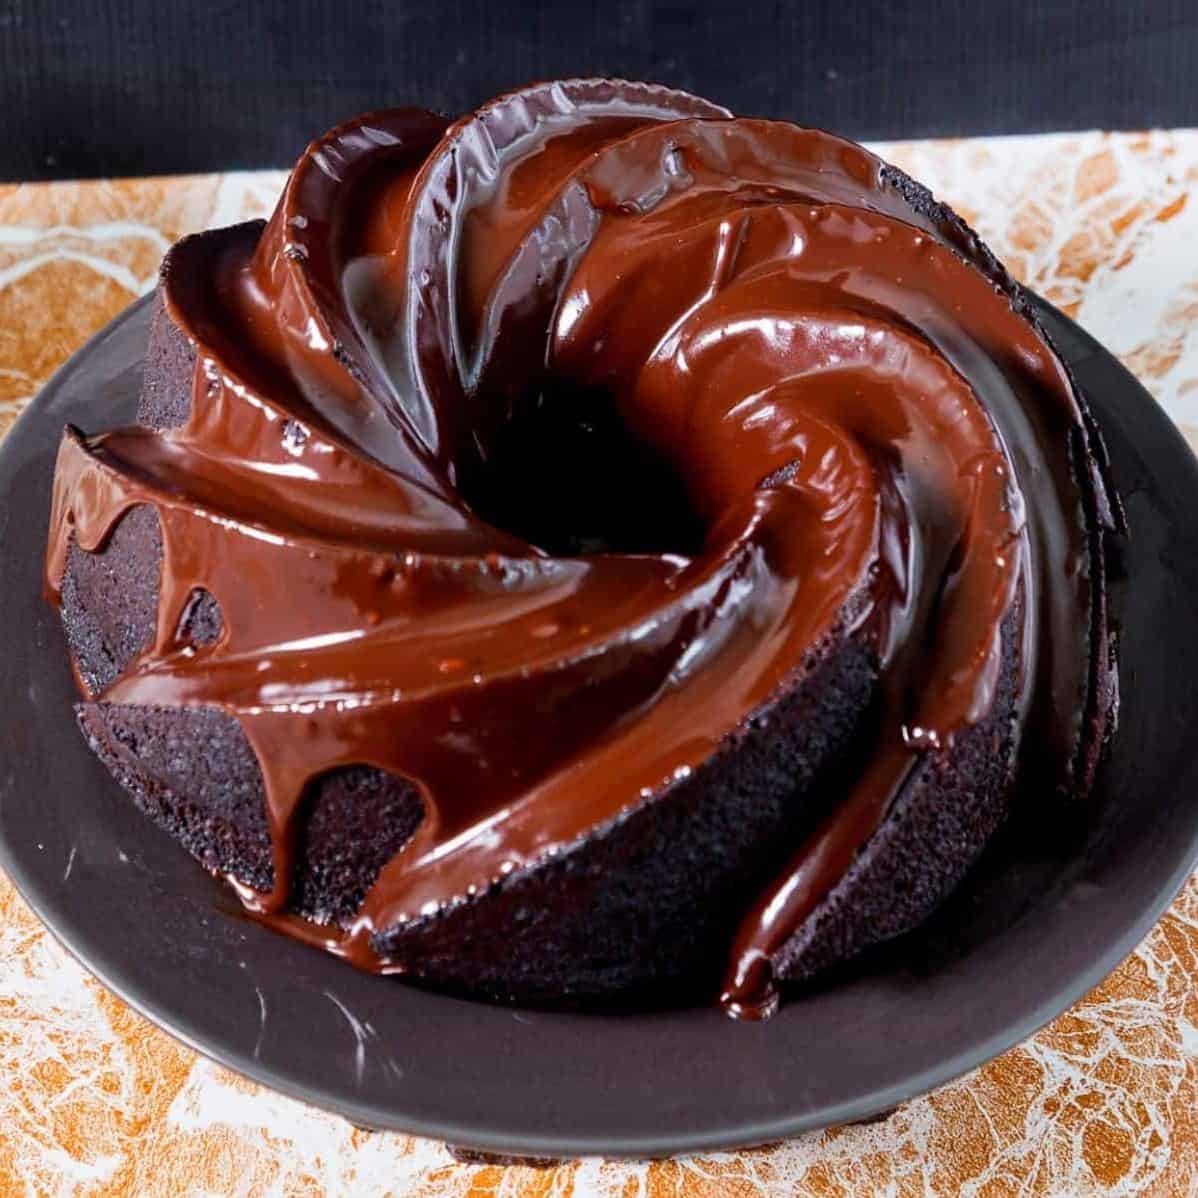  Curb your chocolate cravings with a slice of devil's food pound cake